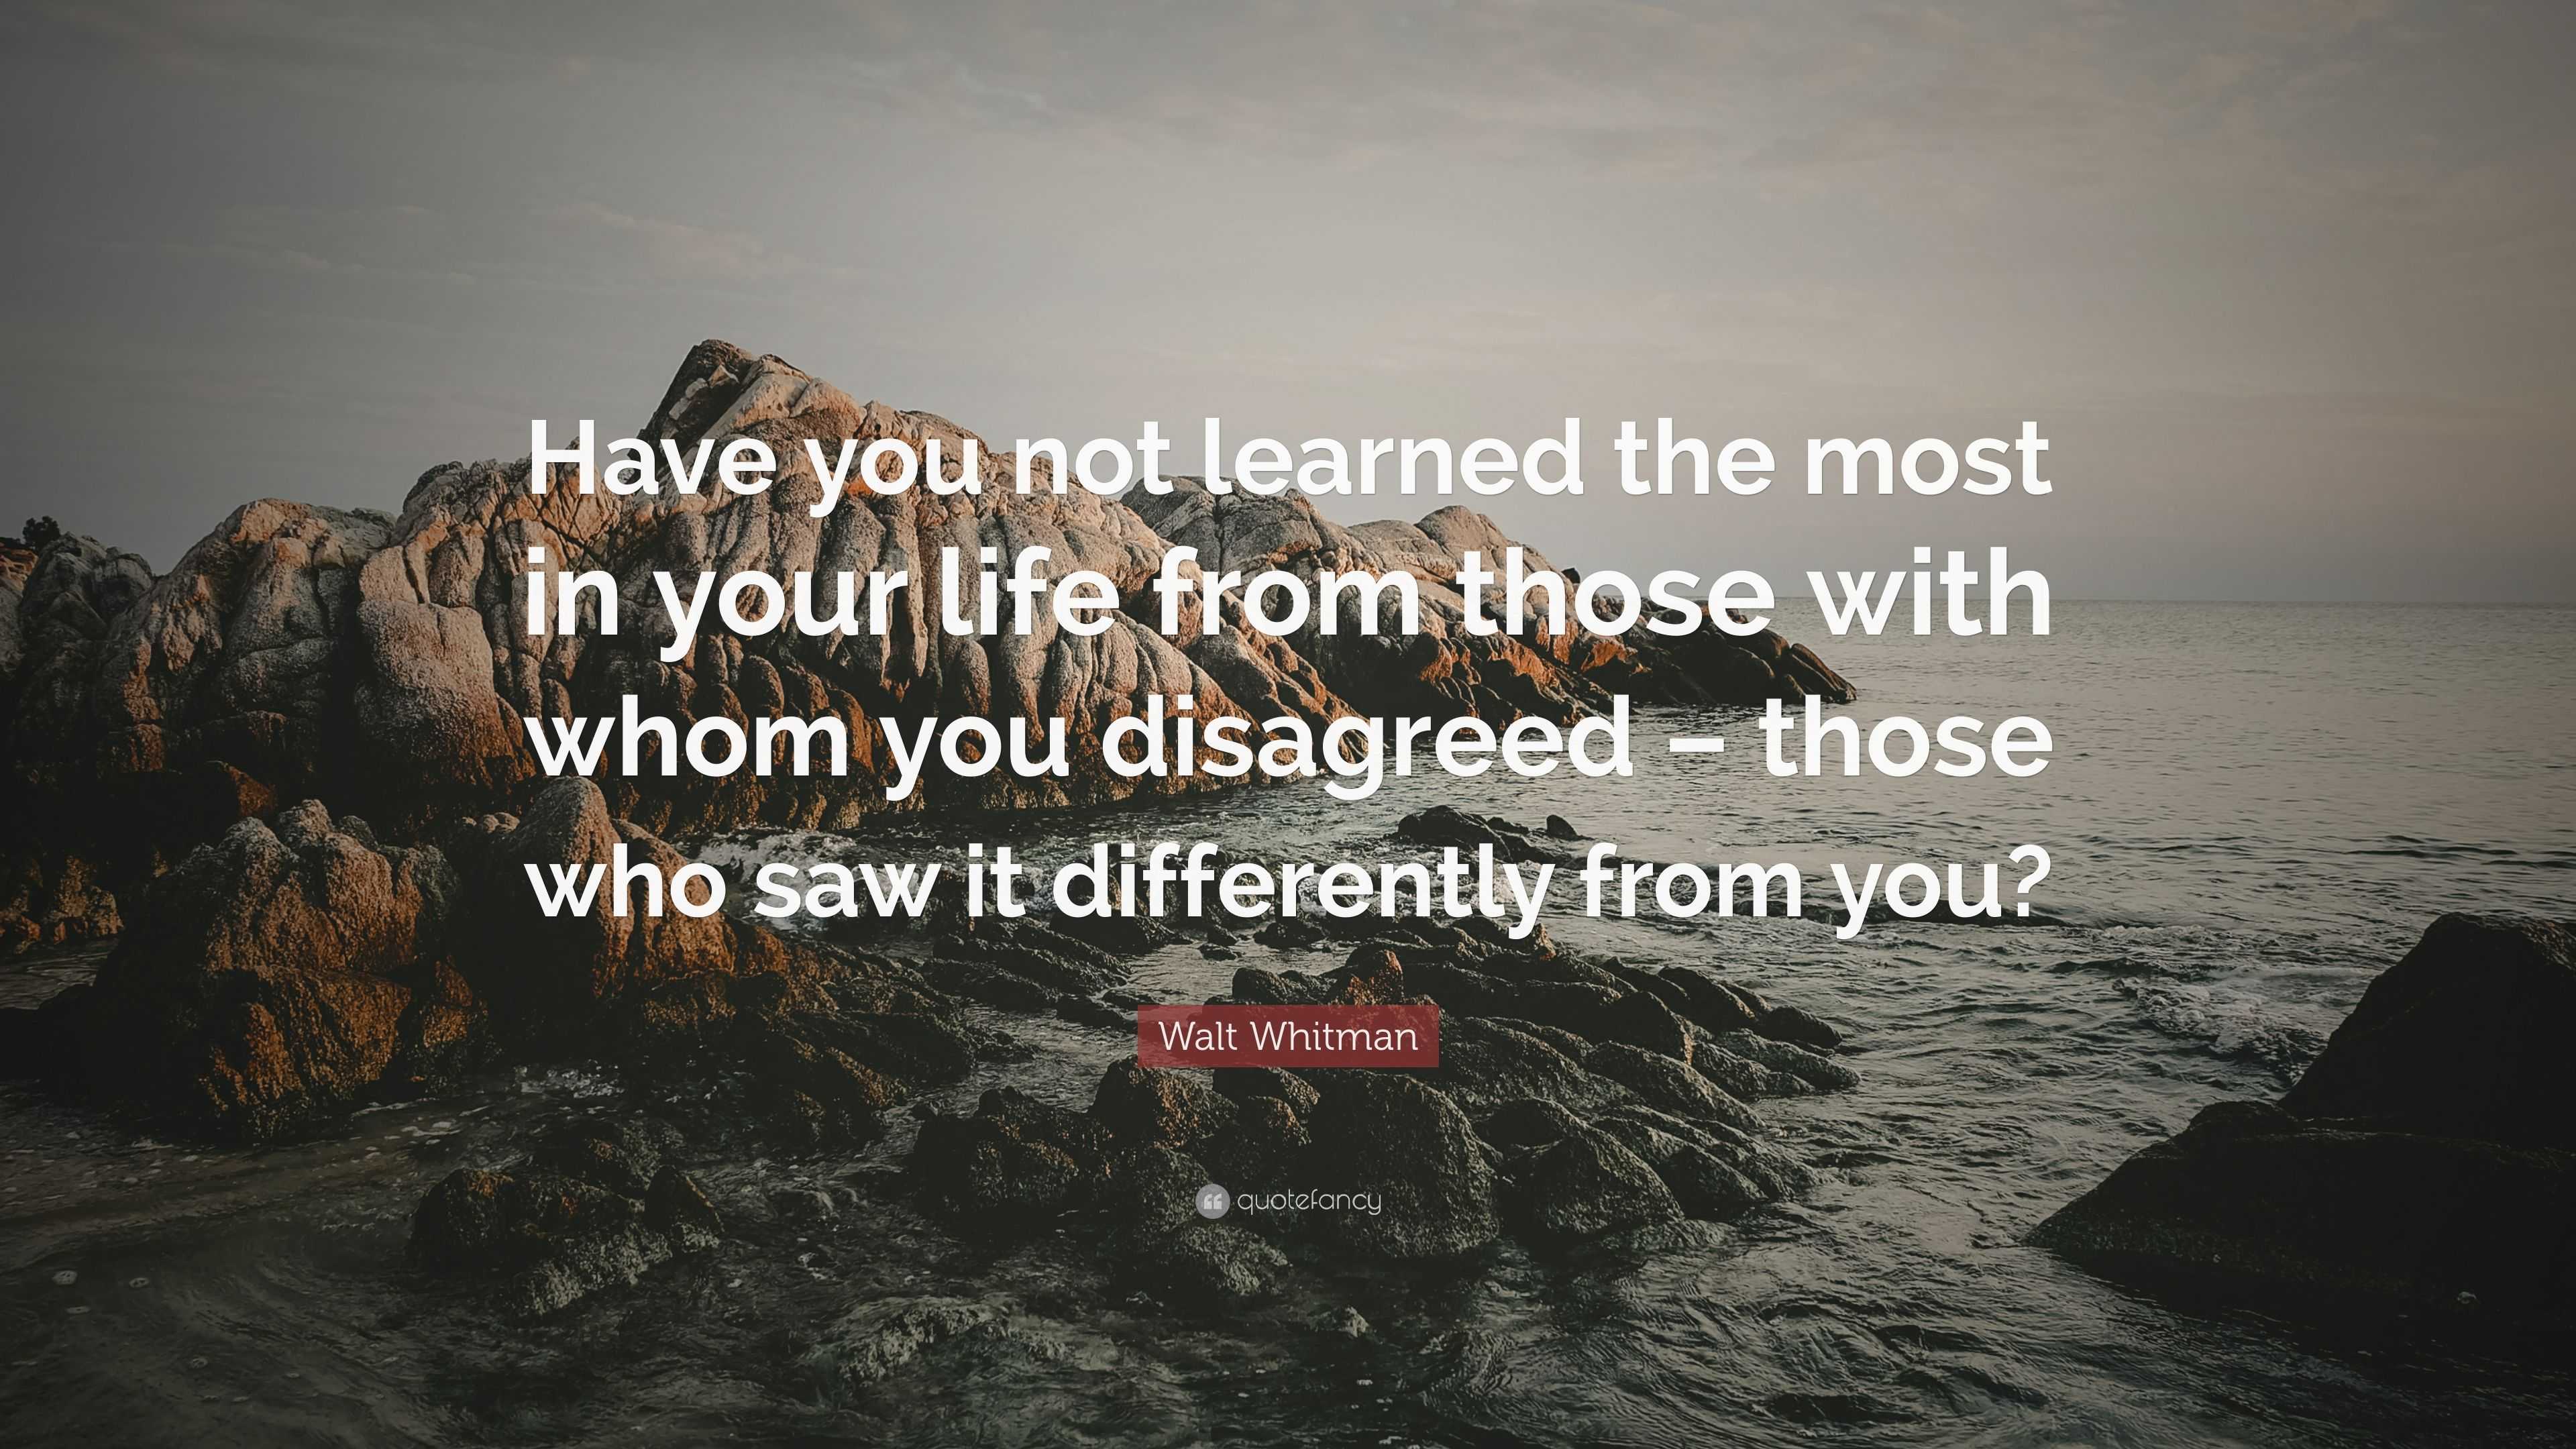 Walt Whitman Quote: “Have you not learned the most in your life from ...